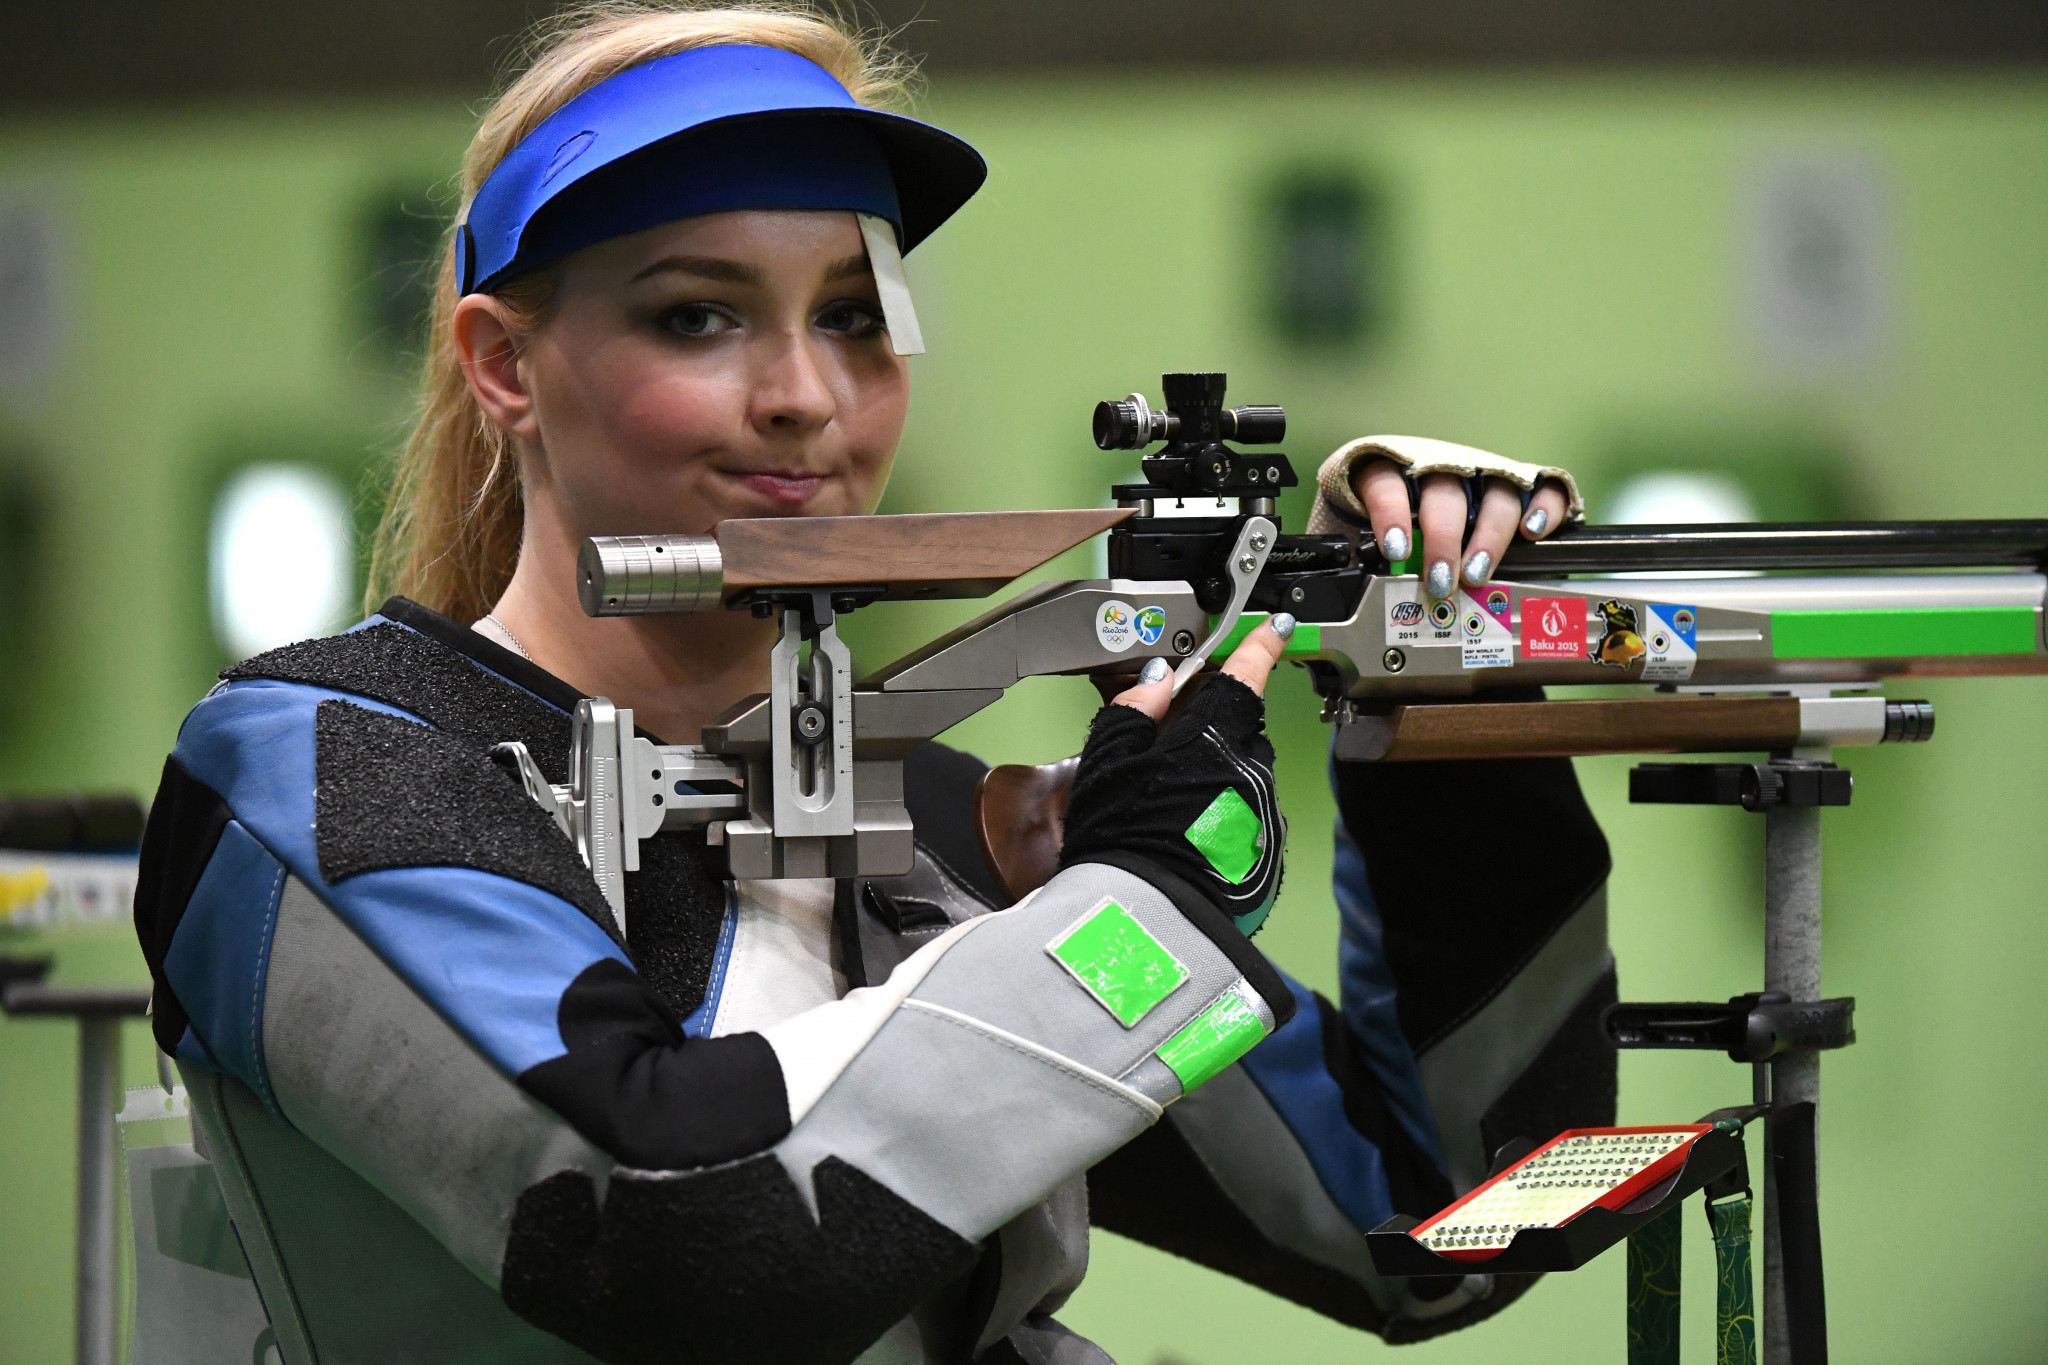 Scotland's Jennifer McIntosh beat younger sister Seonaid to win the gold medal in the women's 50 metres rifle prone event ©Getty Images